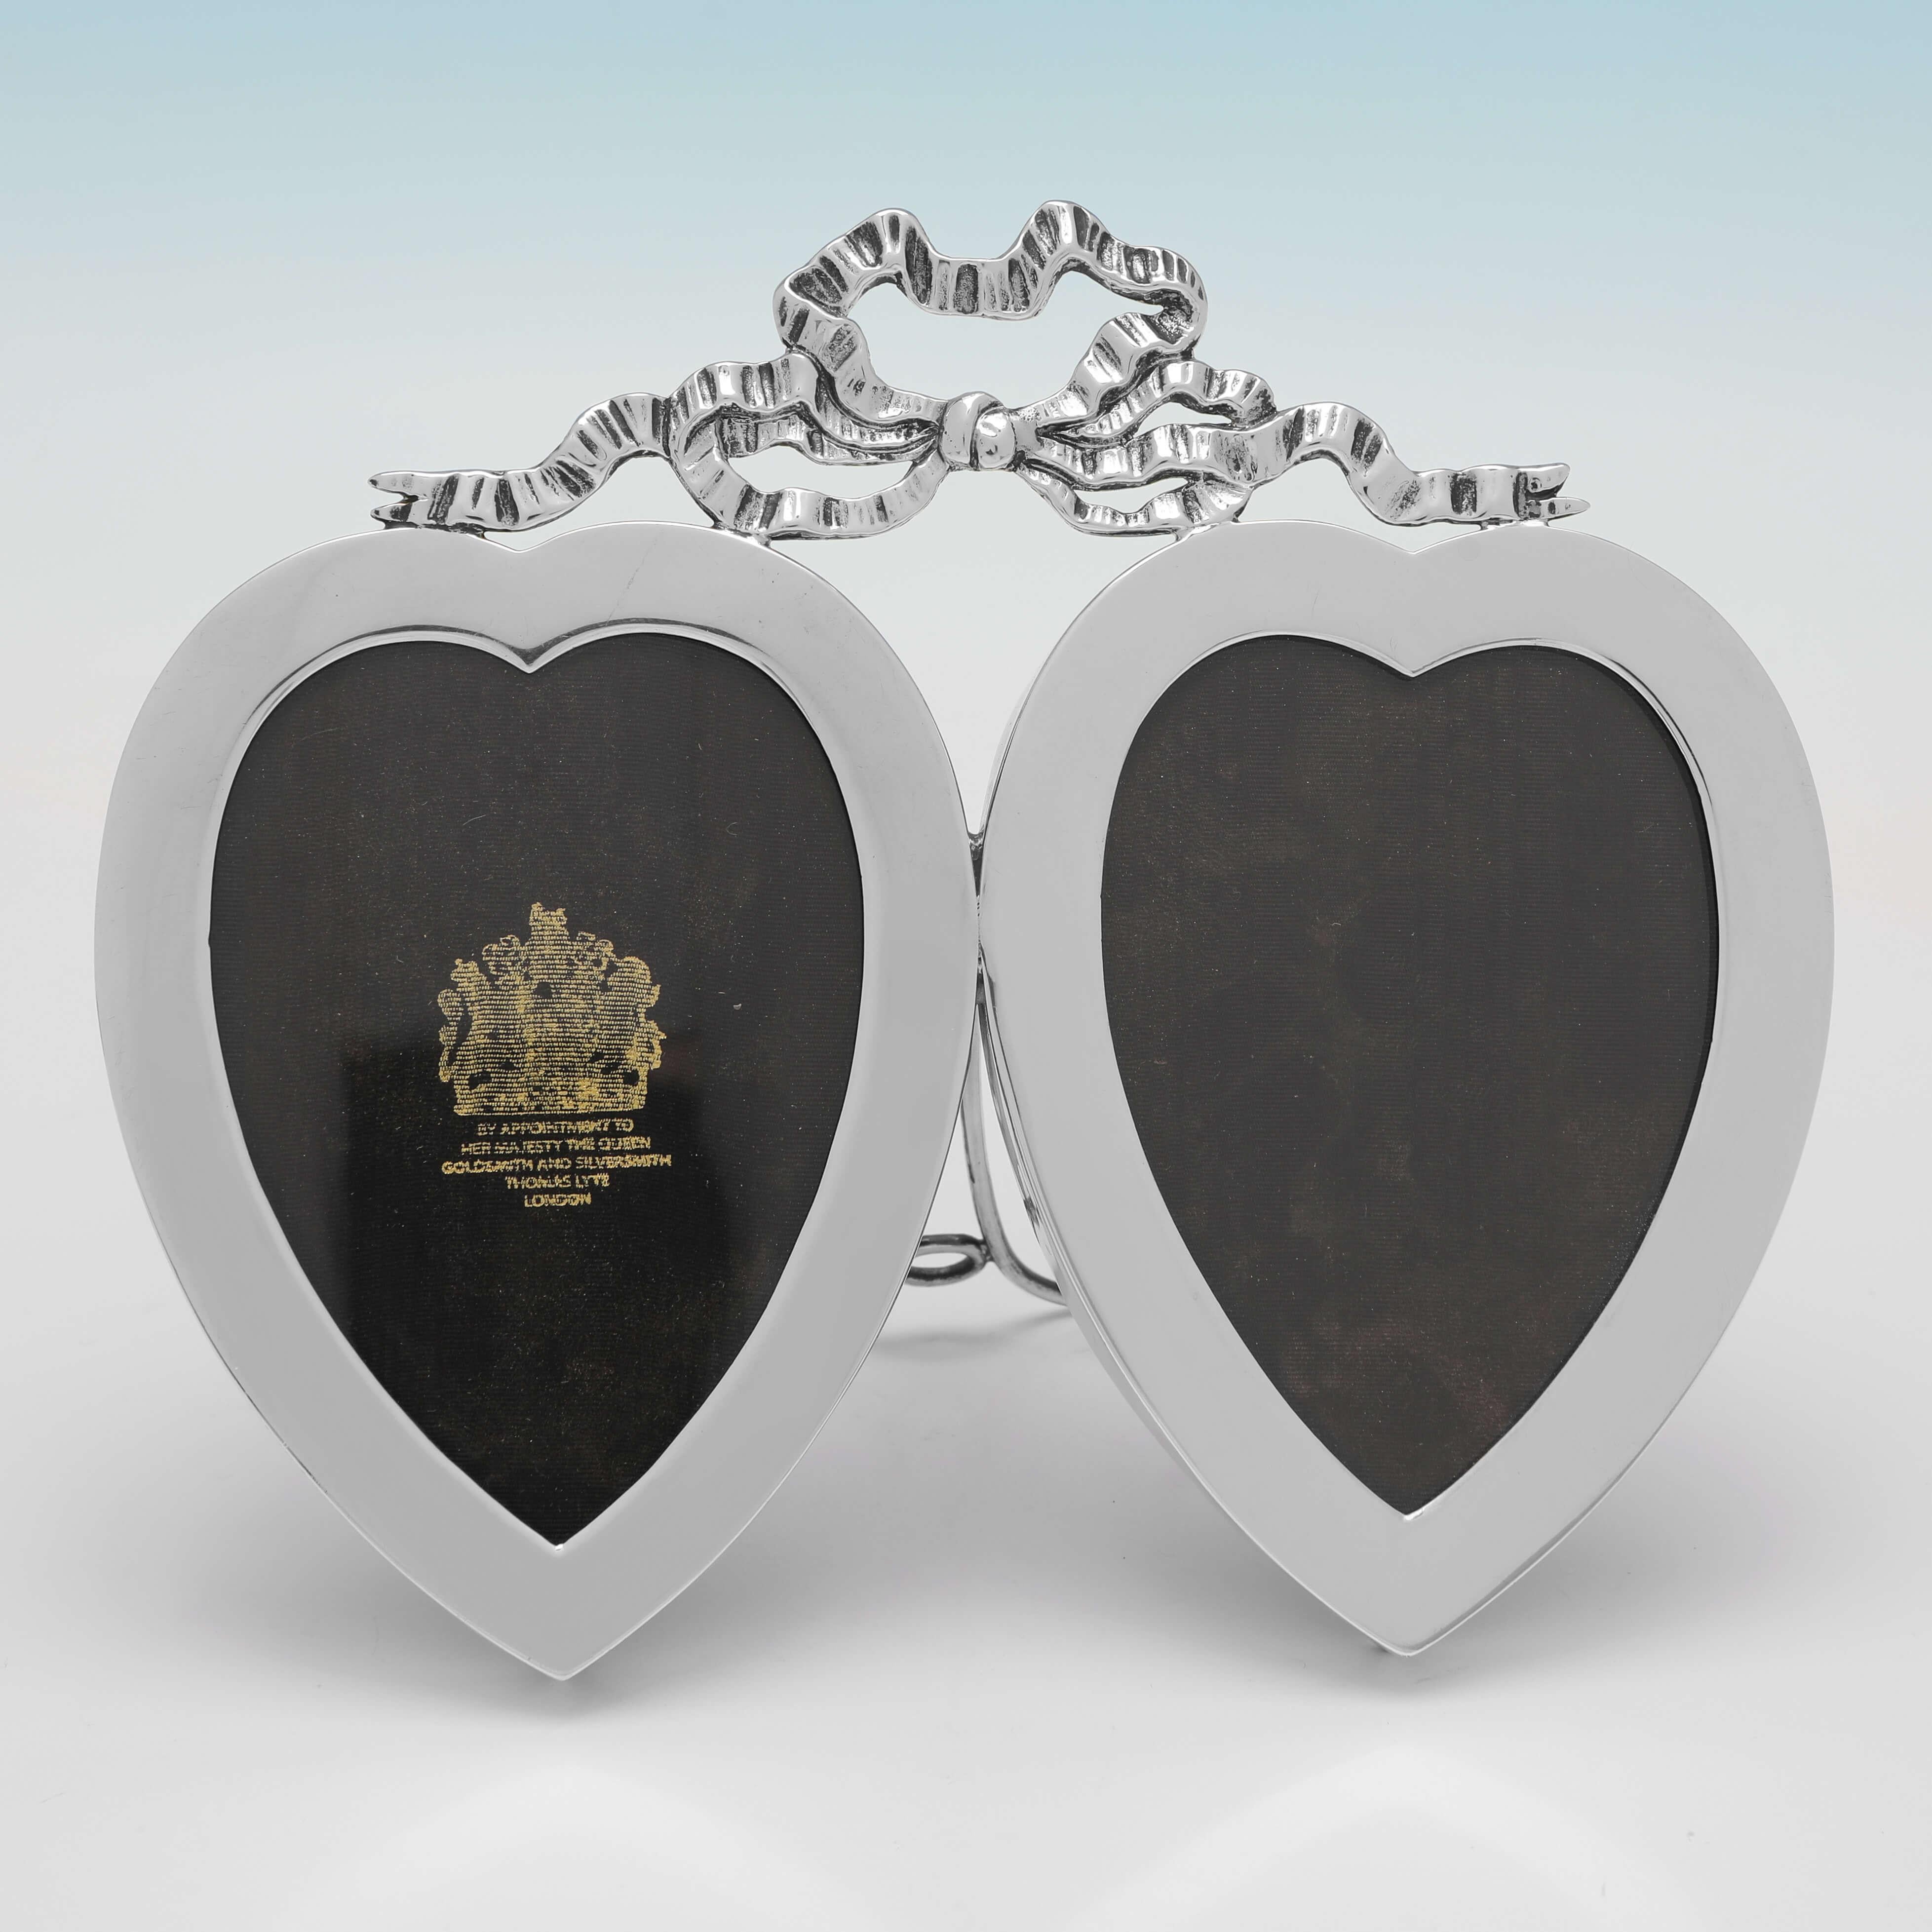 Late 19th Century Victorian Silver Double Photo Frame - Heart Shaped Picture Frames - London 1896 For Sale